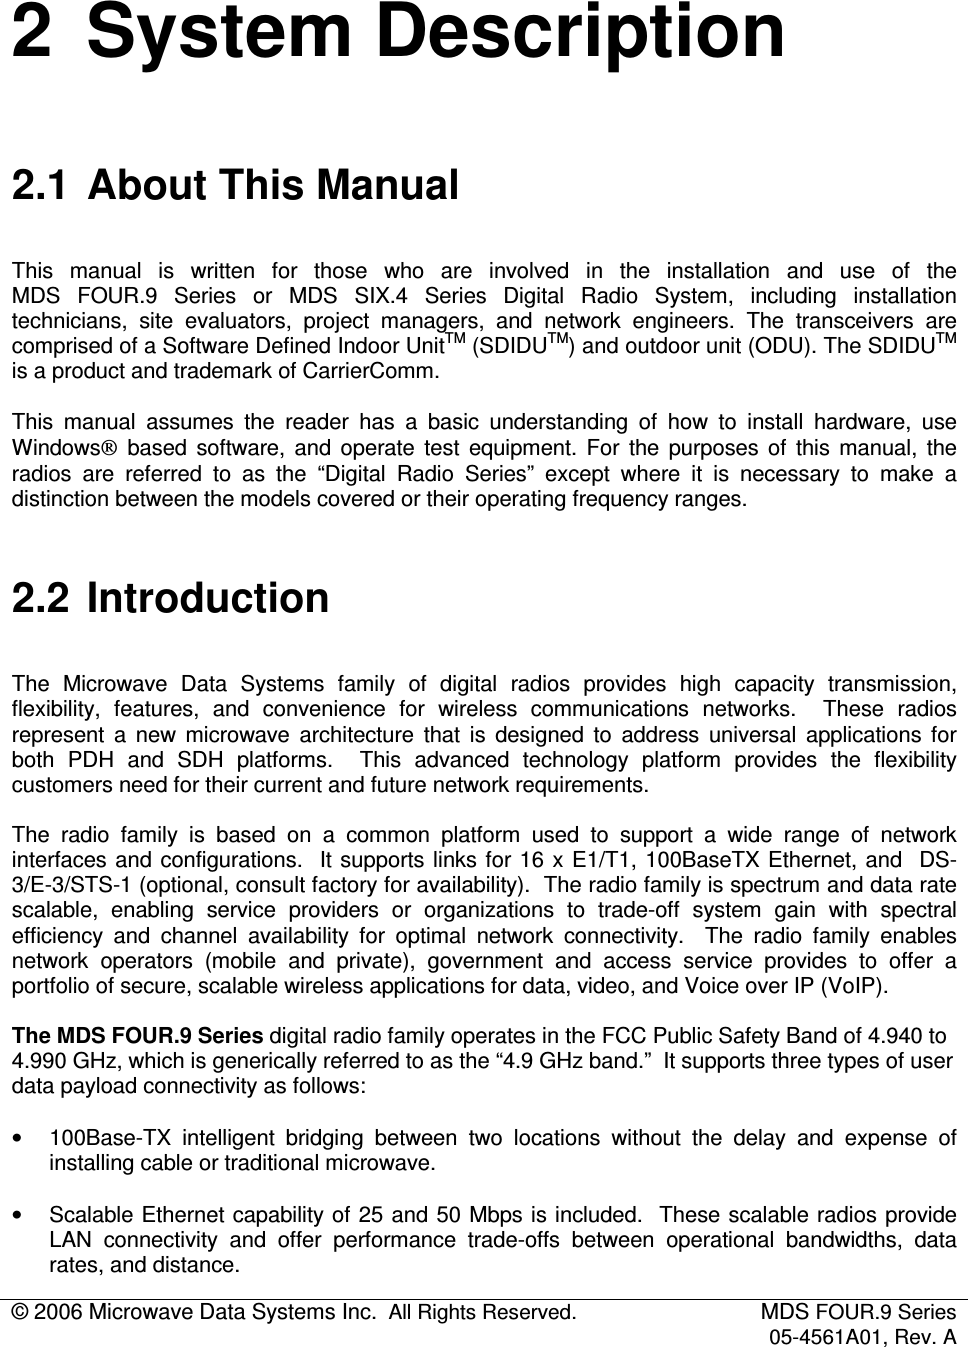 © 2006 Microwave Data Systems Inc.  All Rights Reserved.  MDS FOUR.9 Series 05-4561A01, Rev. A  2  System Description 2.1  About This Manual This  manual  is  written  for  those  who  are  involved  in  the  installation  and  use  of  the  MDS  FOUR.9  Series  or  MDS  SIX.4  Series  Digital  Radio  System,  including  installation technicians,  site  evaluators,  project  managers,  and  network  engineers.  The  transceivers  are comprised of a Software Defined Indoor UnitTM (SDIDUTM) and outdoor unit (ODU). The SDIDUTM is a product and trademark of CarrierComm. This  manual  assumes  the  reader  has  a  basic  understanding  of  how  to  install  hardware,  use Windows  based  software,  and  operate  test  equipment.  For  the  purposes  of  this  manual,  the radios  are  referred  to  as  the  “Digital  Radio  Series”  except  where  it  is  necessary  to  make  a distinction between the models covered or their operating frequency ranges. 2.2  Introduction The  Microwave  Data  Systems  family  of  digital  radios  provides  high  capacity  transmission, flexibility,  features,  and  convenience  for  wireless  communications  networks.    These  radios represent  a  new  microwave  architecture  that  is  designed  to  address  universal  applications  for both  PDH  and  SDH  platforms.    This  advanced  technology  platform  provides  the  flexibility customers need for their current and future network requirements. The  radio  family  is  based  on  a  common  platform  used  to  support  a  wide  range  of  network interfaces and  configurations.  It supports links for 16 x E1/T1, 100BaseTX Ethernet, and  DS-3/E-3/STS-1 (optional, consult factory for availability).  The radio family is spectrum and data rate scalable,  enabling  service  providers  or  organizations  to  trade-off  system  gain  with  spectral efficiency  and  channel  availability  for  optimal  network  connectivity.    The  radio  family  enables network  operators  (mobile  and  private),  government  and  access  service  provides  to  offer  a portfolio of secure, scalable wireless applications for data, video, and Voice over IP (VoIP).  The MDS FOUR.9 Series digital radio family operates in the FCC Public Safety Band of 4.940 to 4.990 GHz, which is generically referred to as the “4.9 GHz band.”  It supports three types of user data payload connectivity as follows: •  100Base-TX  intelligent  bridging  between  two  locations  without  the  delay  and  expense  of installing cable or traditional microwave. •  Scalable Ethernet capability of 25 and 50 Mbps is included.  These scalable radios provide LAN  connectivity  and  offer  performance  trade-offs  between  operational  bandwidths,  data rates, and distance.  